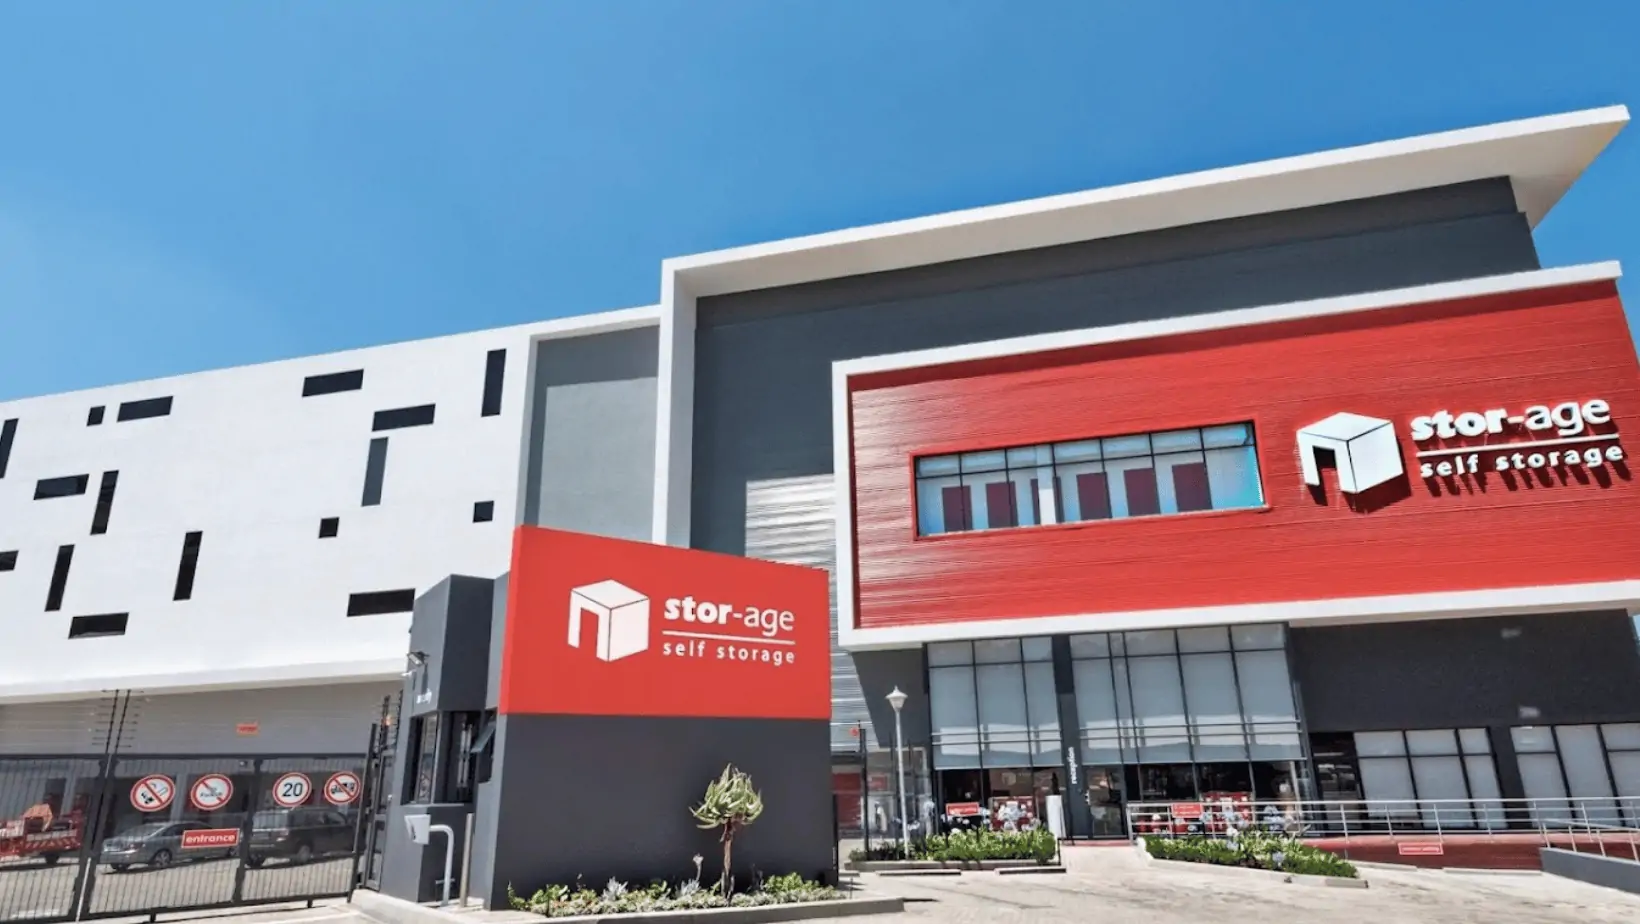 Old Mutual Limited Acquires 10.04% Stake in Stor-Age Property REIT Limited